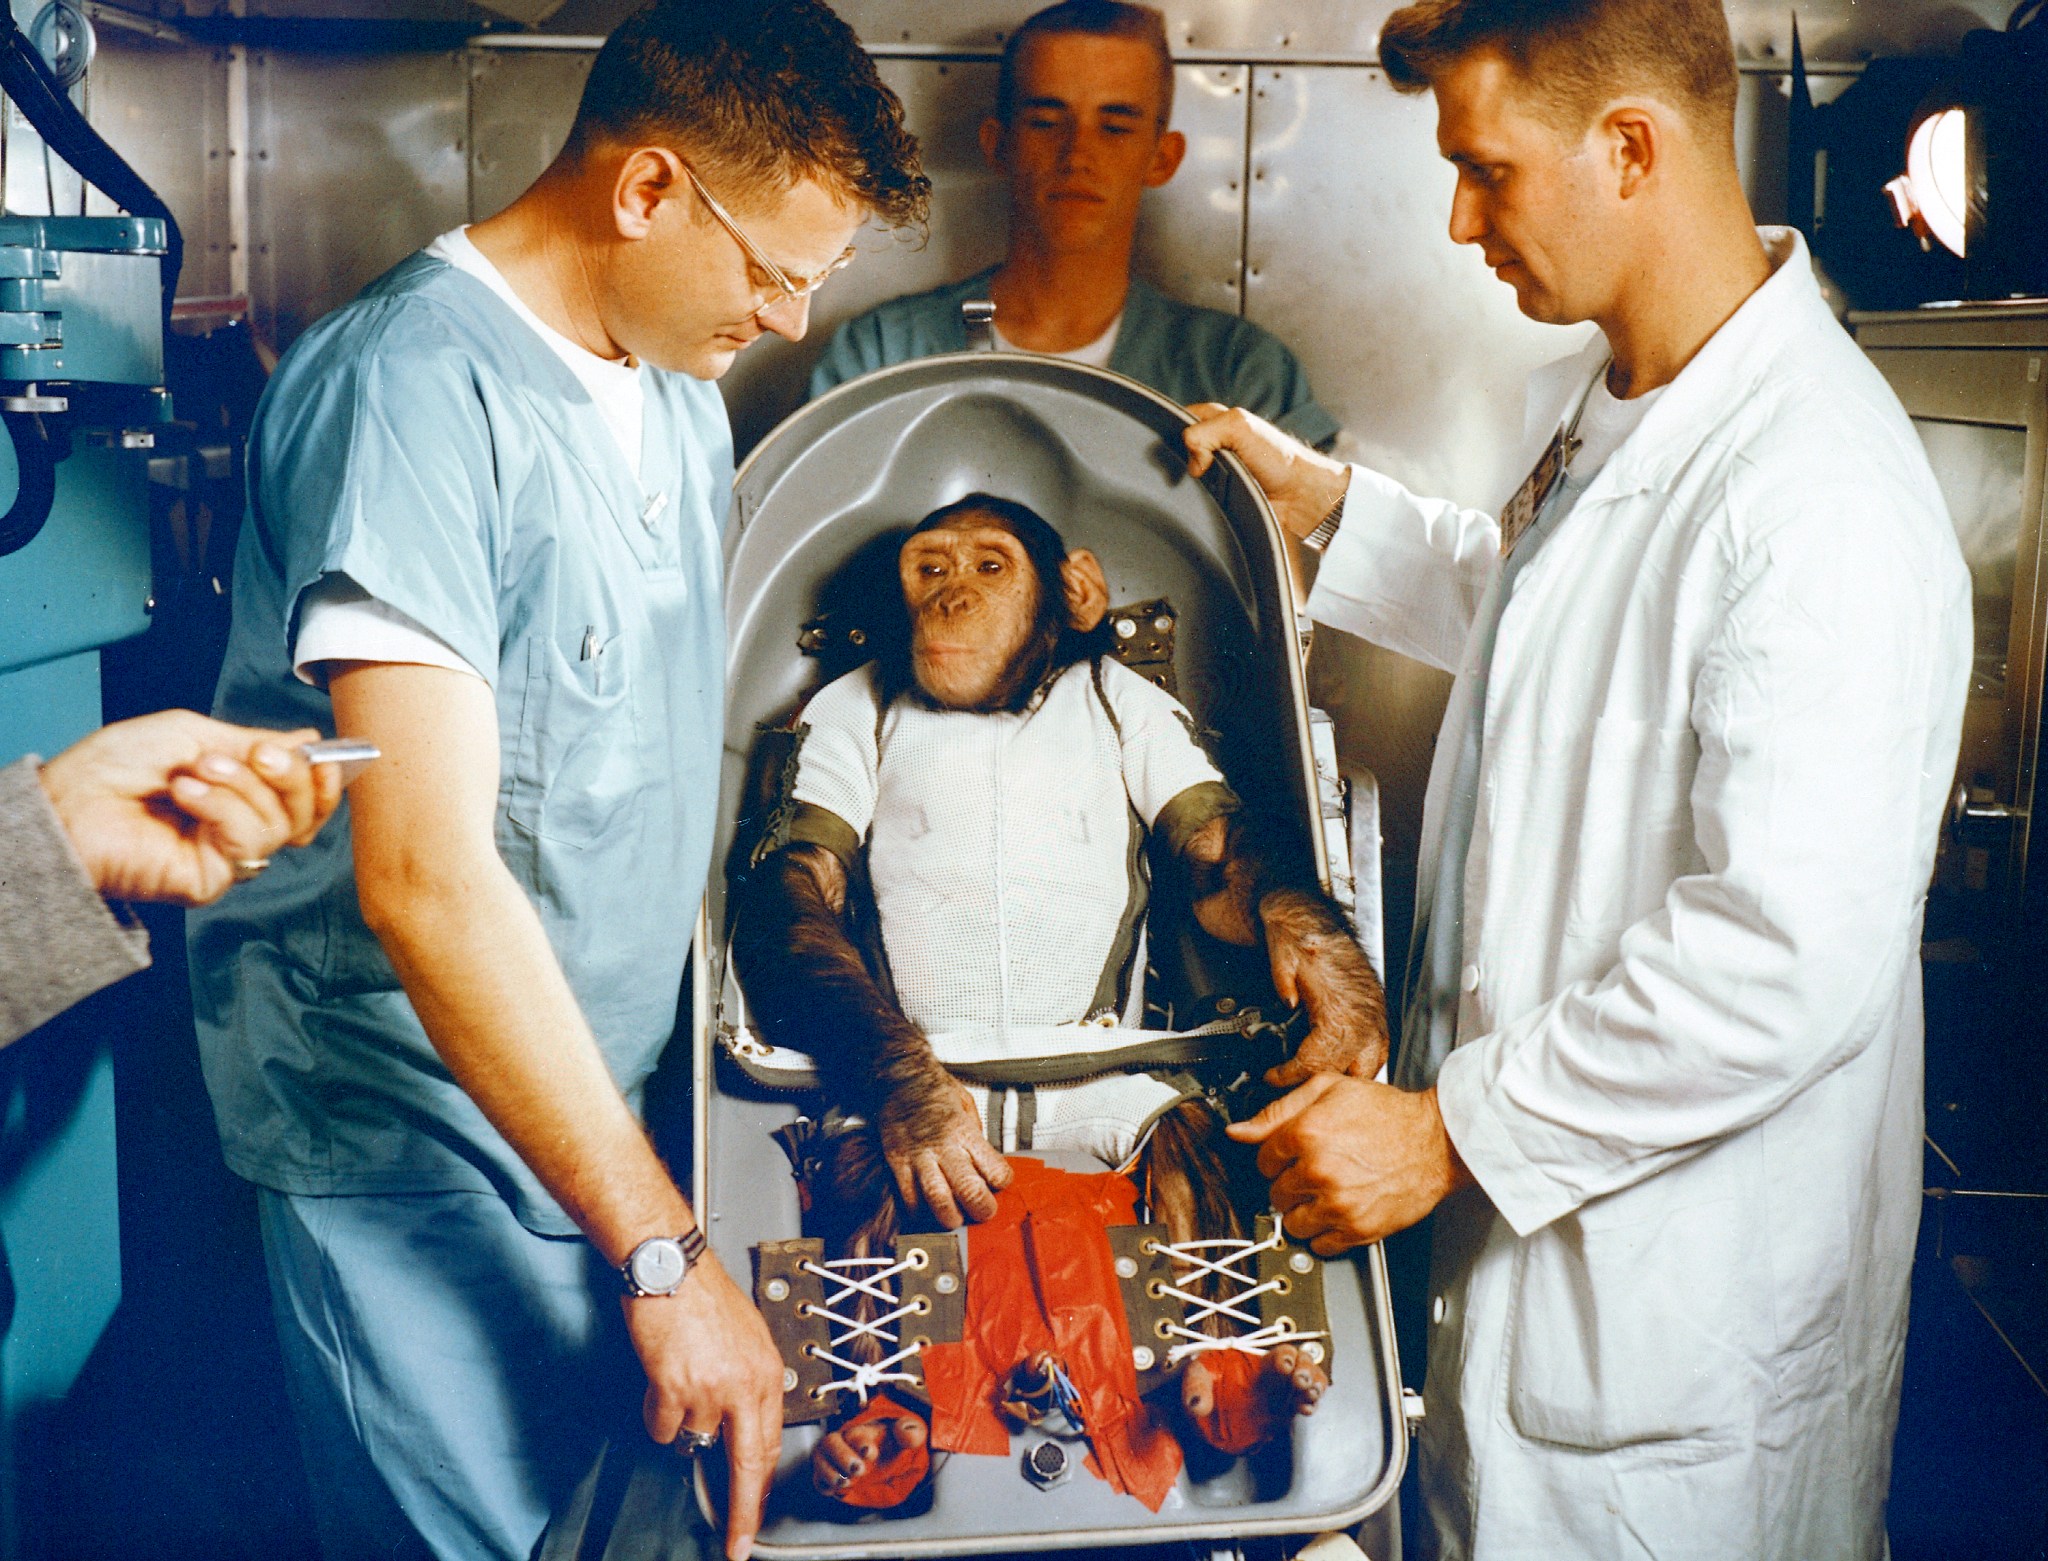 A photo of Ham the chimpanzee who was safely who safely returned from space